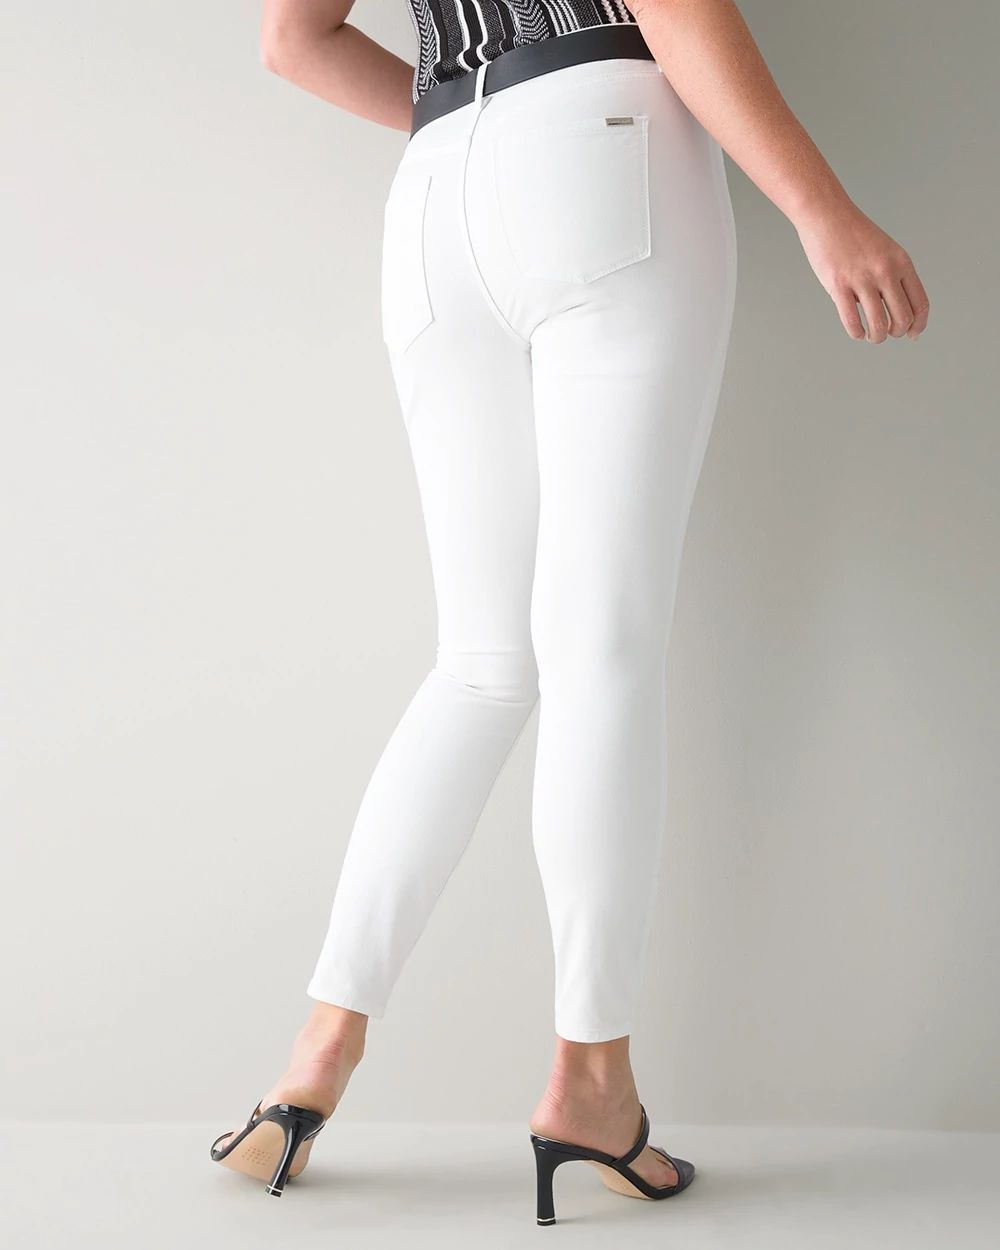 Curvy-Fit High-Rise Sculpt Skinny Jeans click to view larger image.